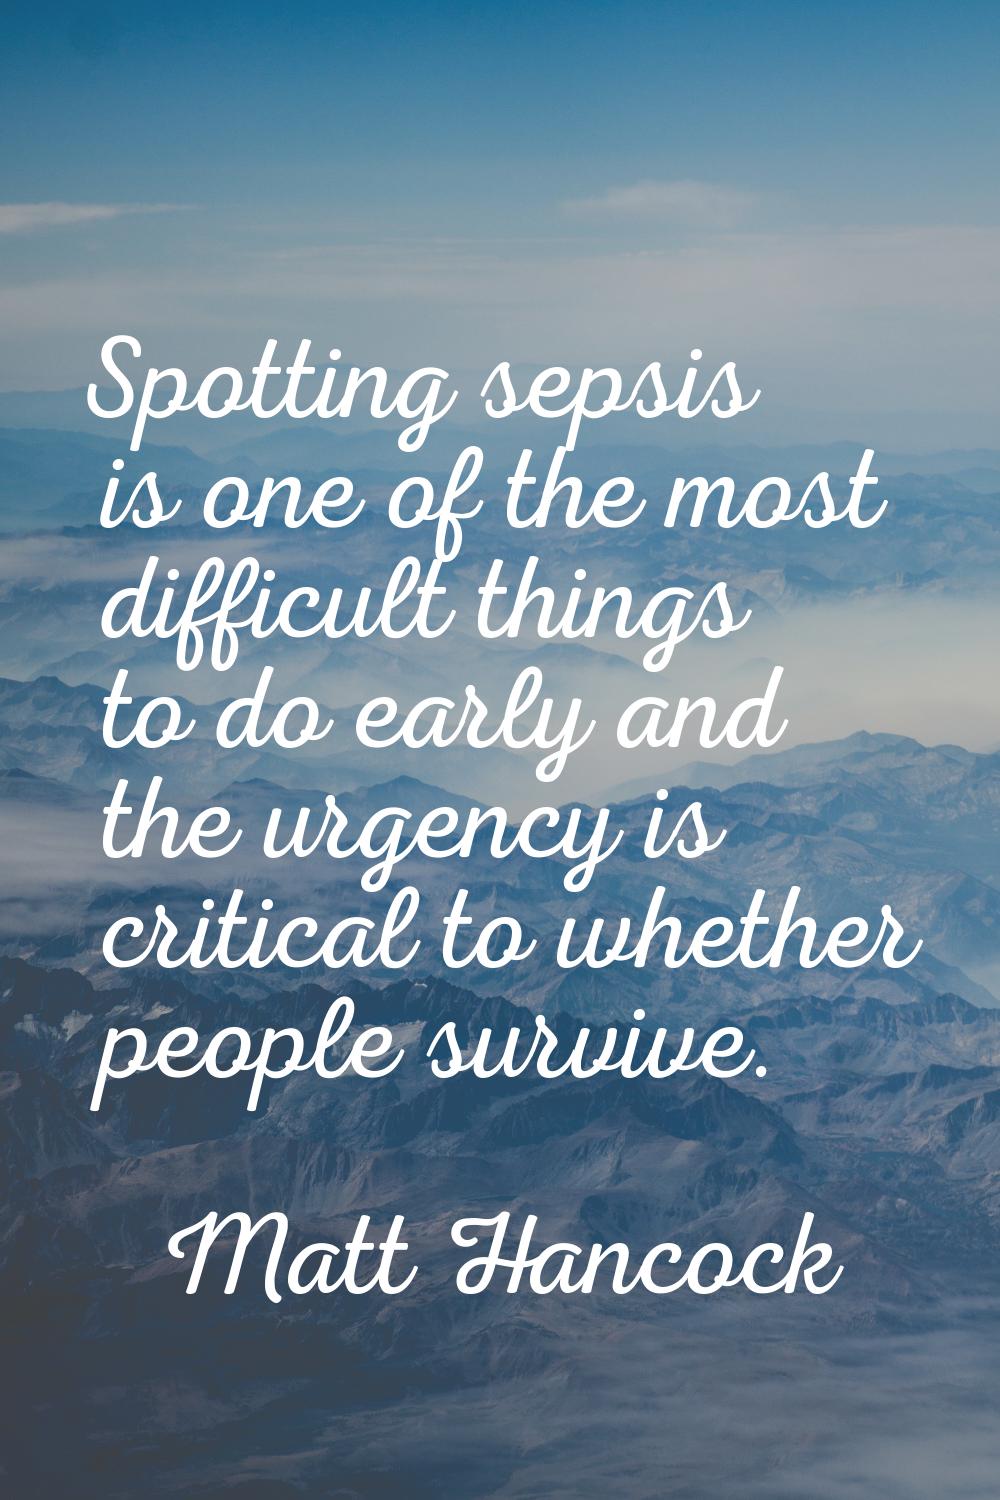 Spotting sepsis is one of the most difficult things to do early and the urgency is critical to whet